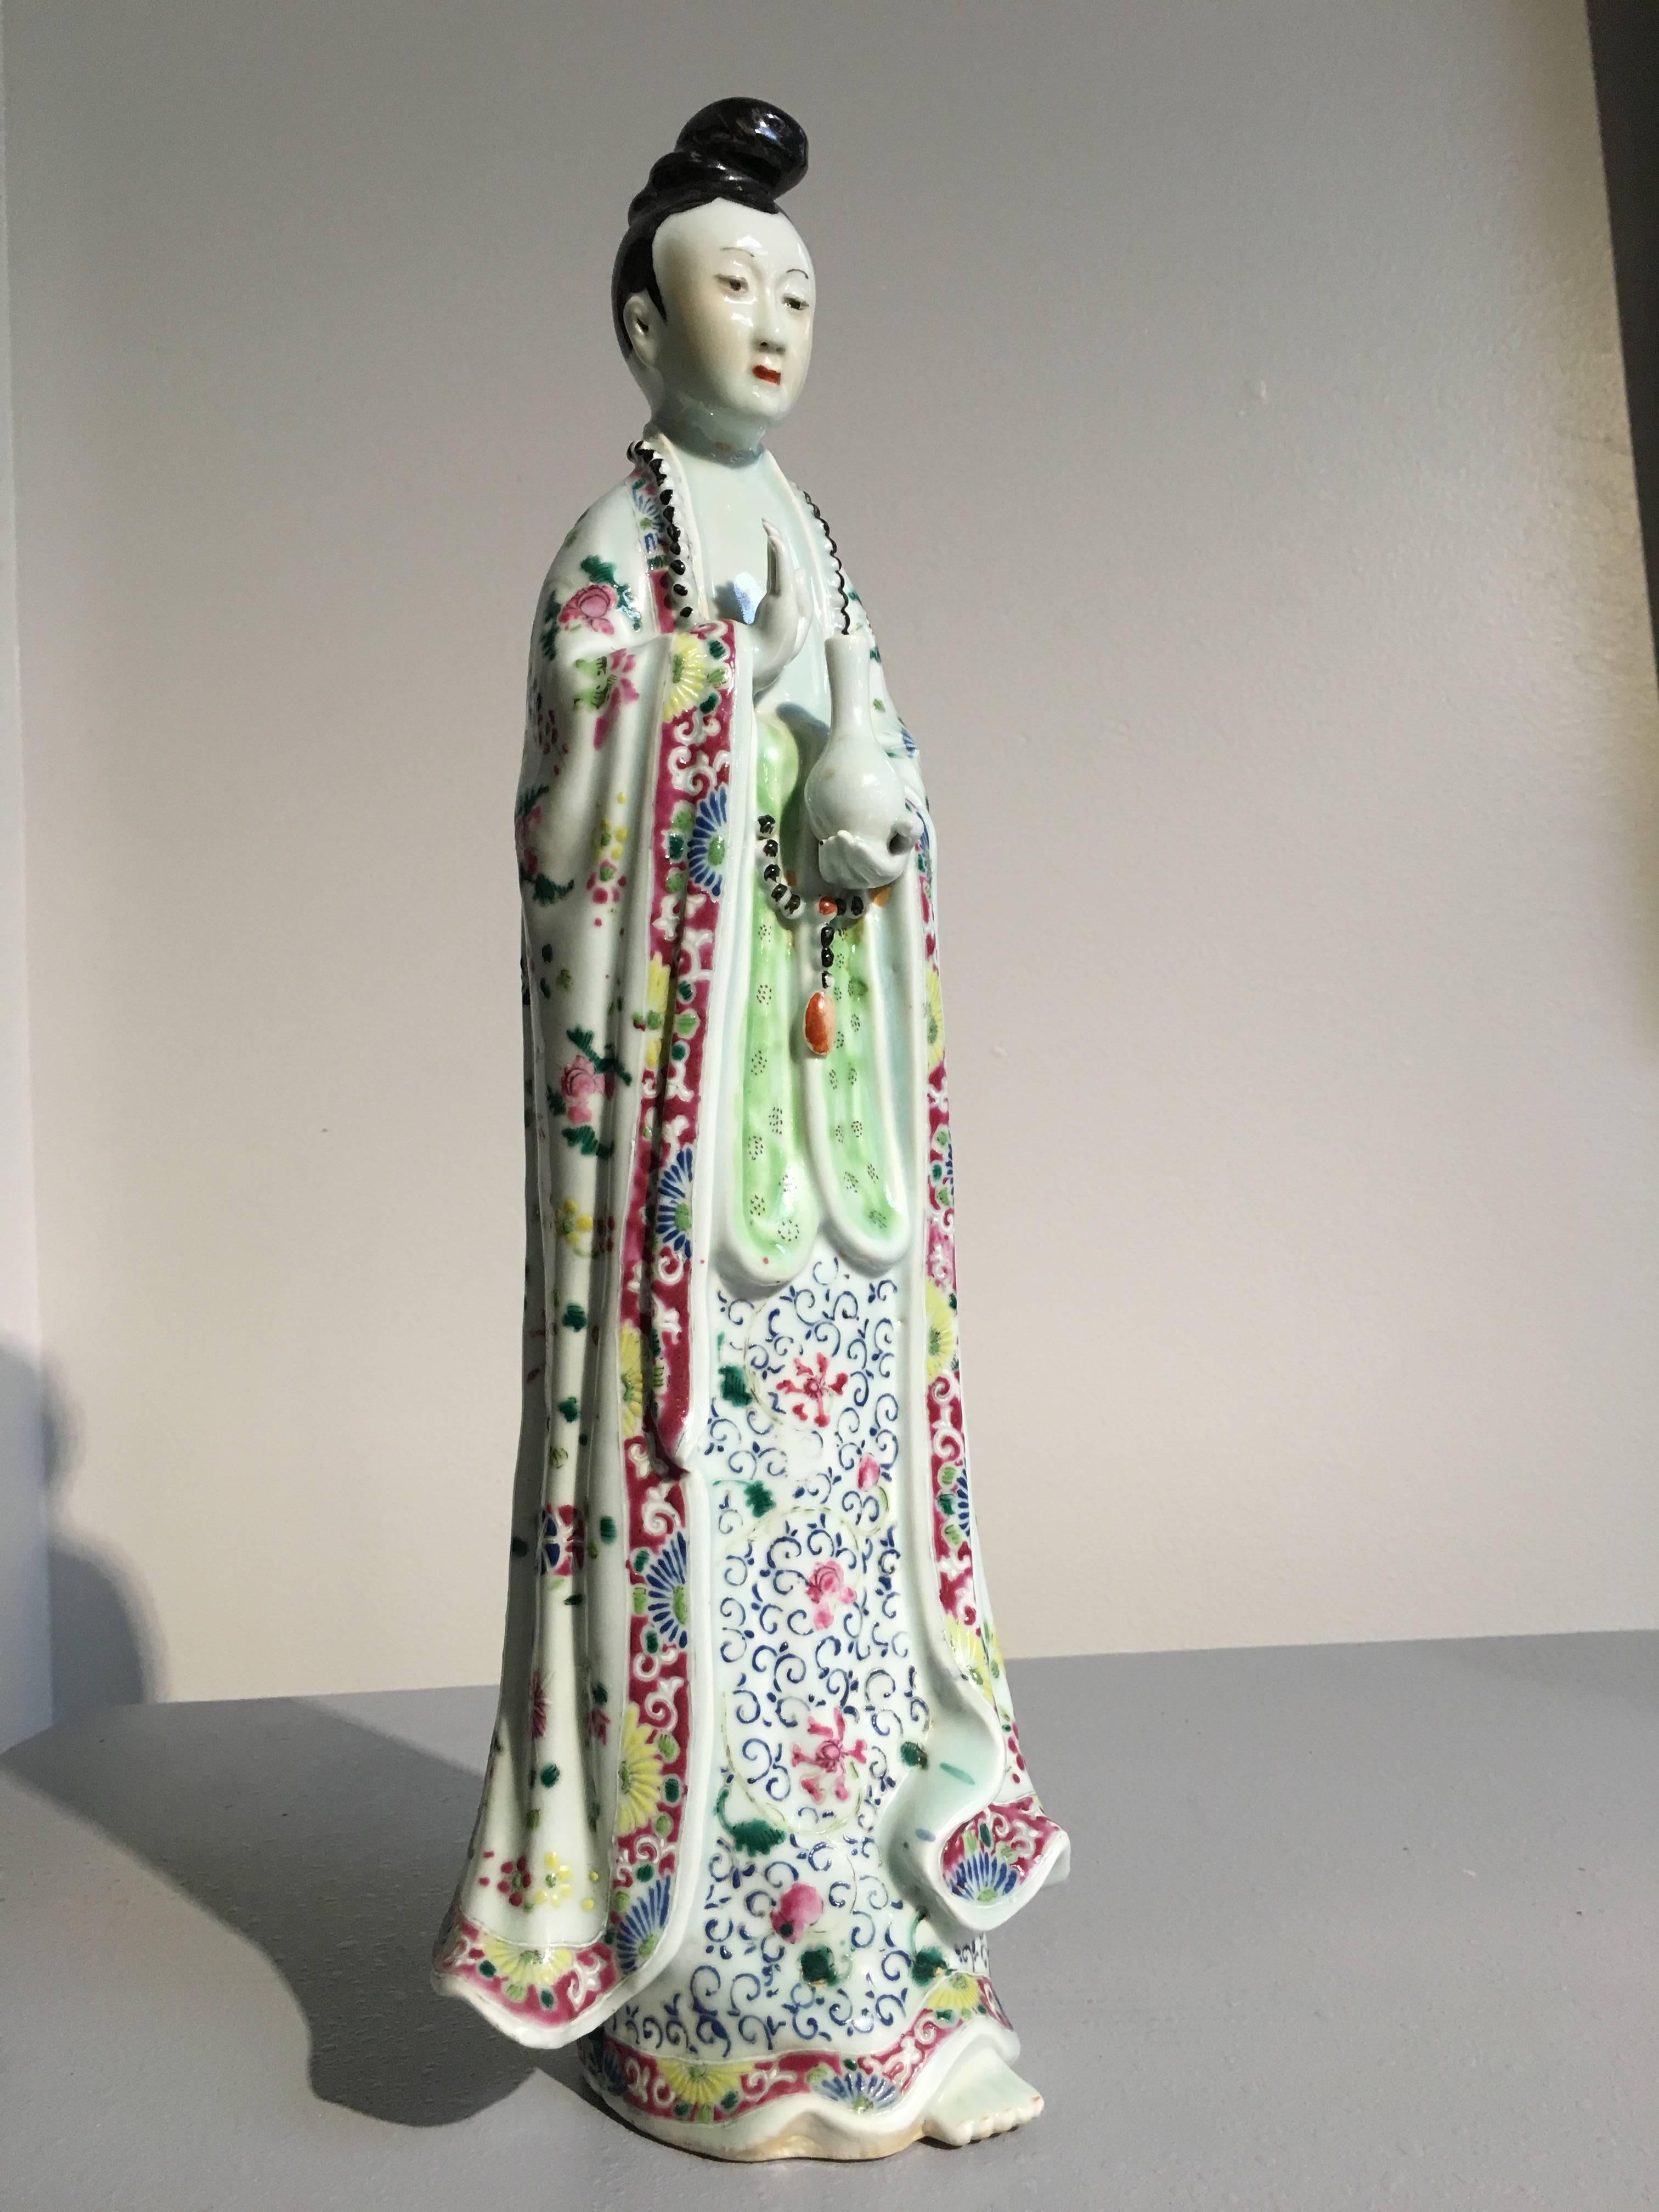 An unusually tall Chinese porcelain model of Guanyin, the goddess of mercy and compassion. She is portrayed standing, dressed in voluminous robes that billow around her, finely painted with vibrant famille rose enamels. Her attribute, the sacred